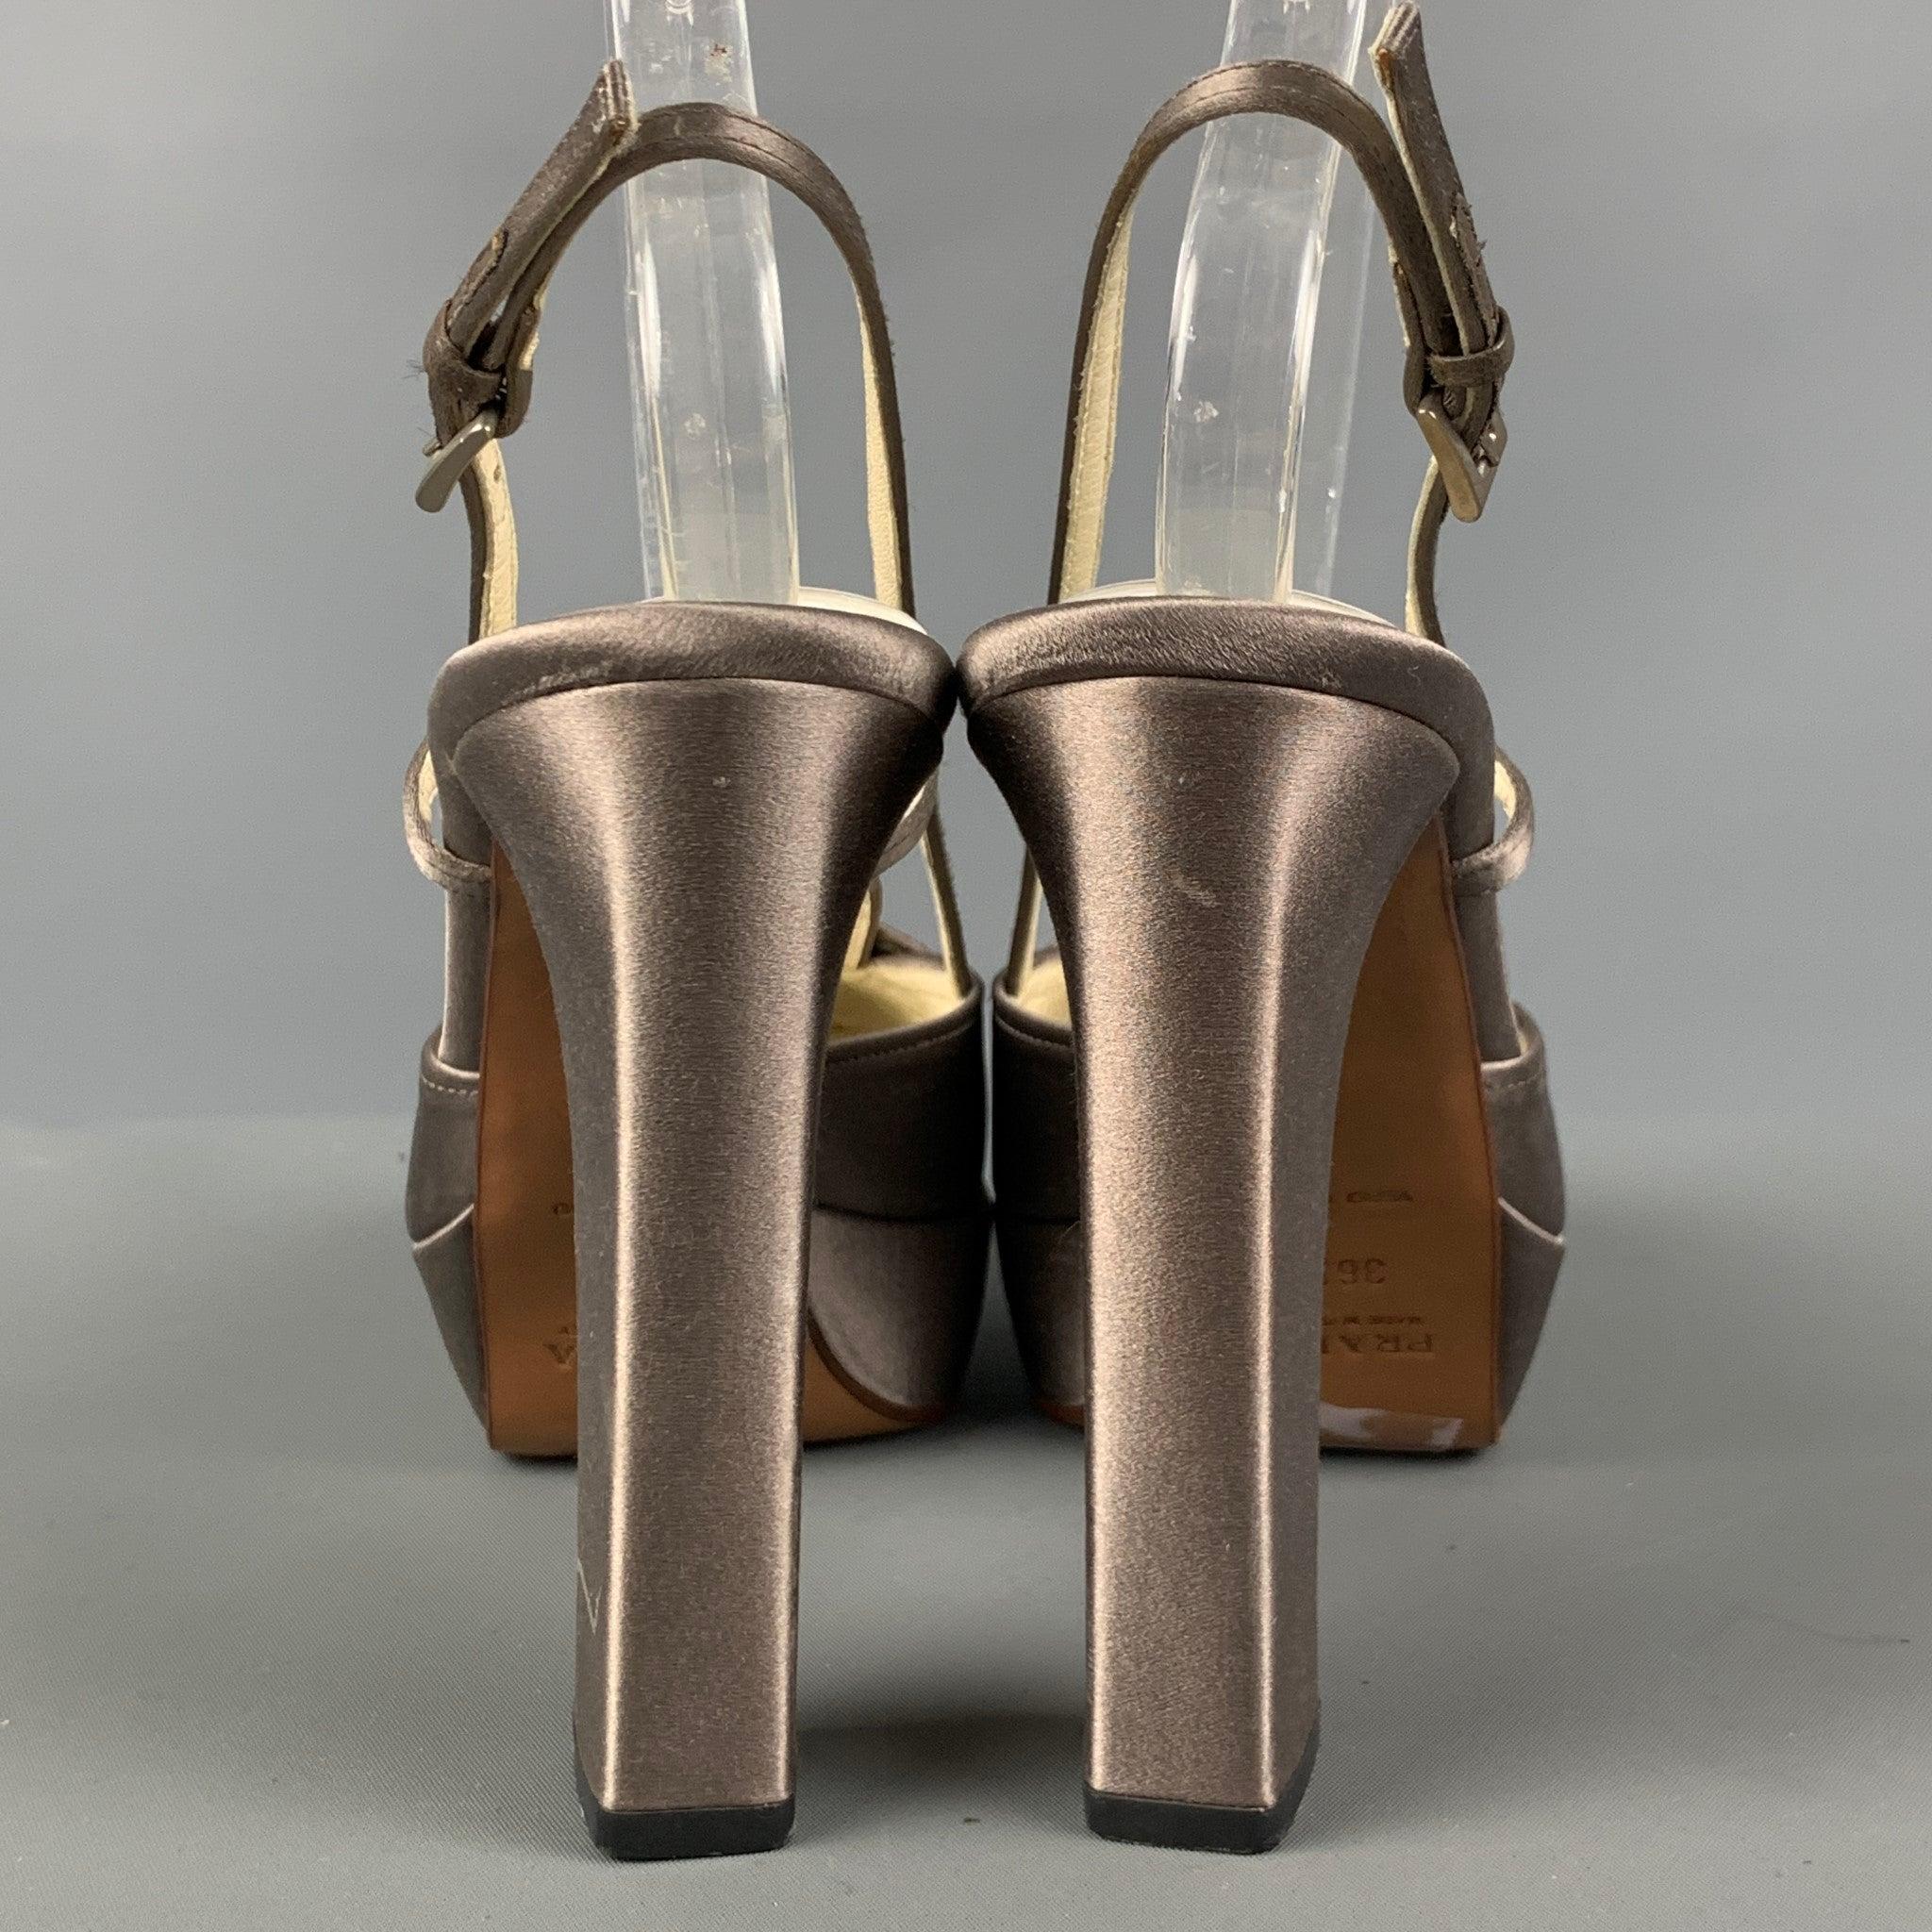 PRADA Size 6.5 Grey Slingback Pumps In Good Condition For Sale In San Francisco, CA